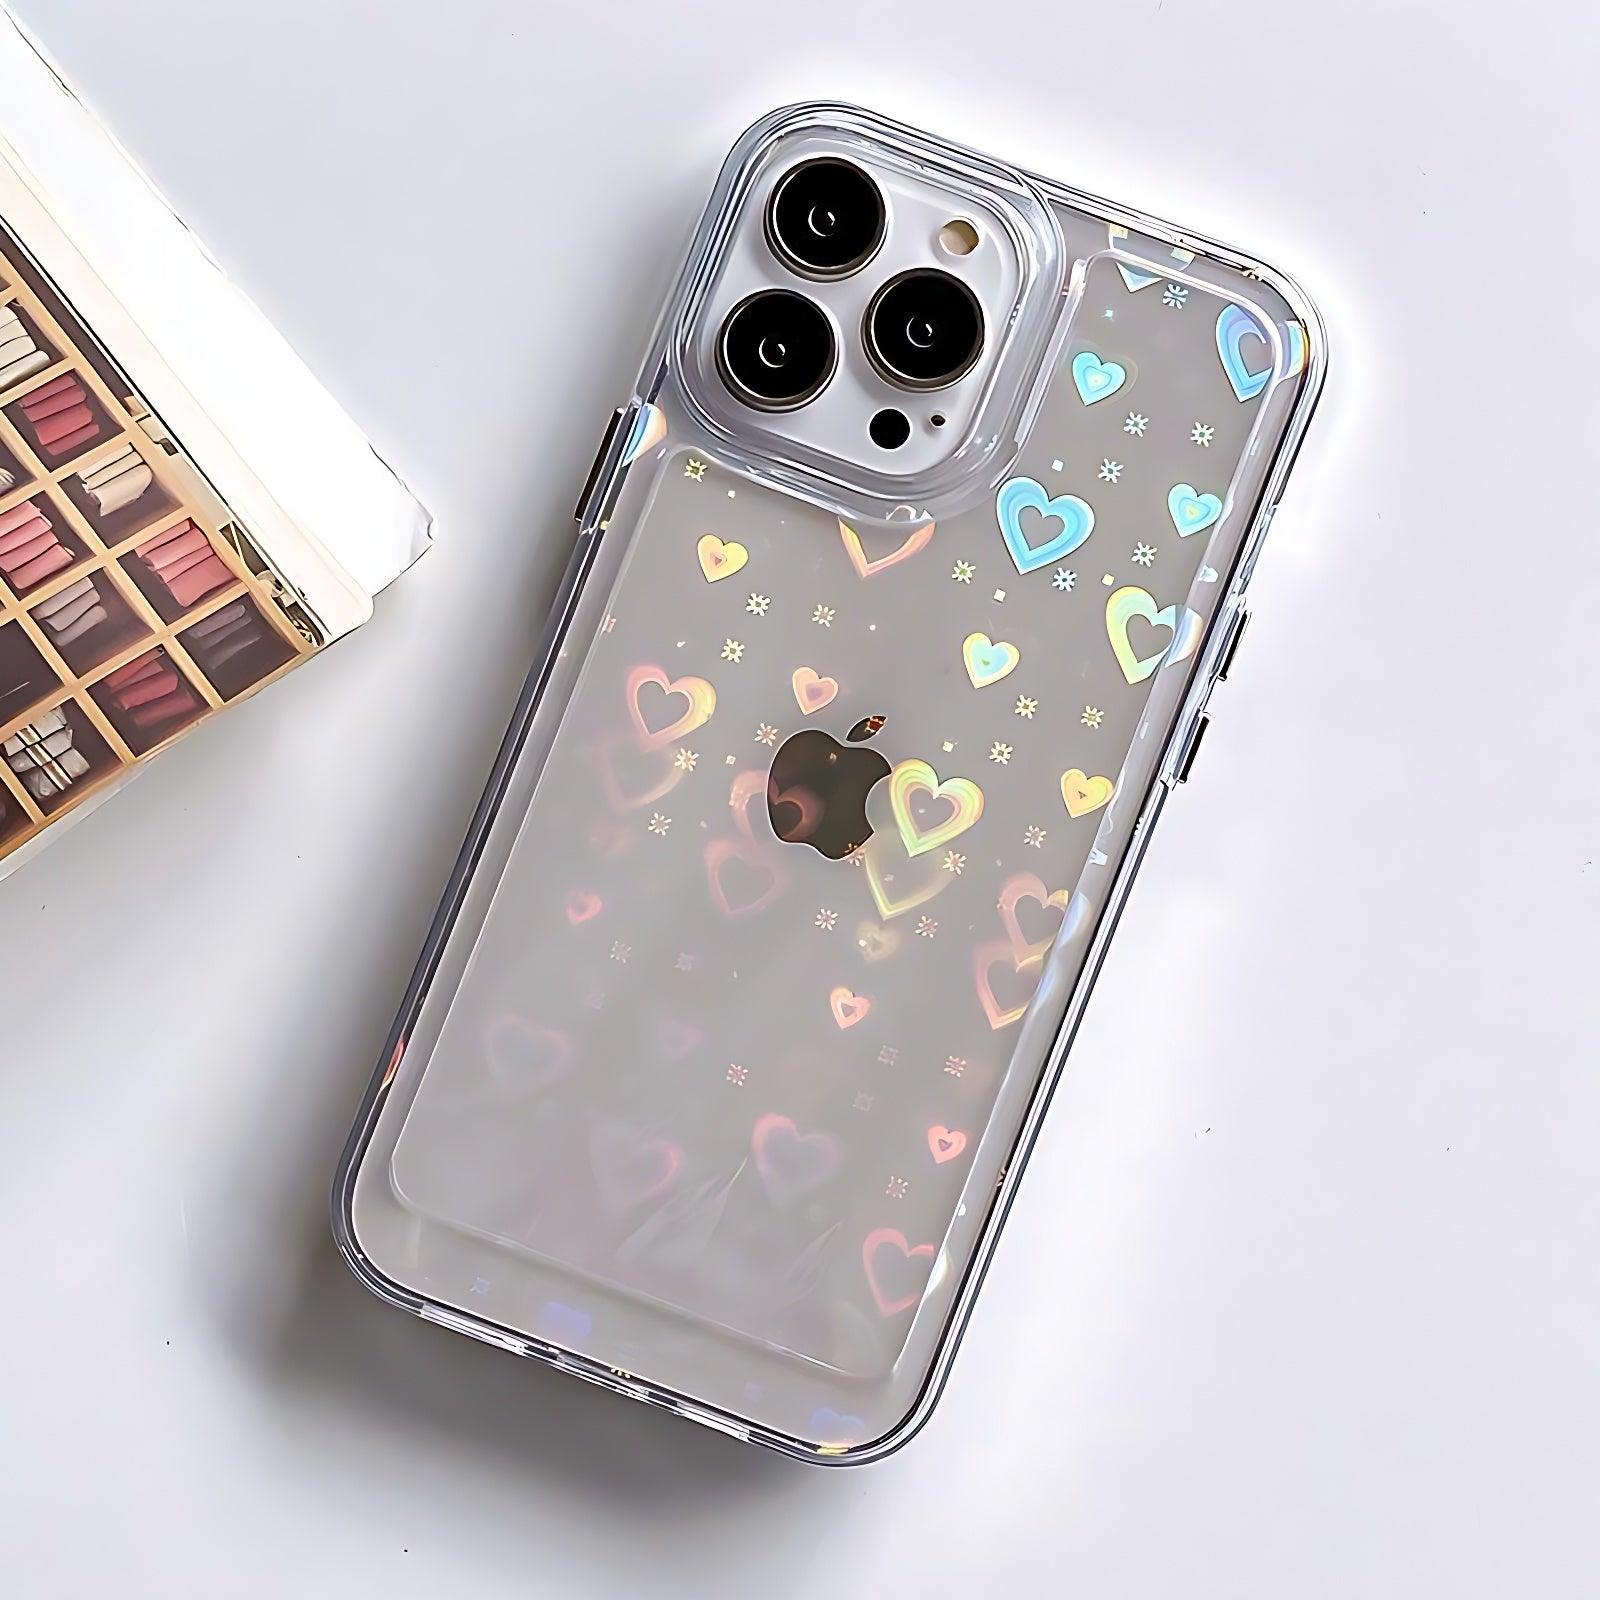 Green Gold Electroplated Phone Case for iPhone 11 Pro Max XR XS MAX Soft  Shiny Luxury Cases for iPhone 6s 7 8 Plus Fashion Cover - AliExpress